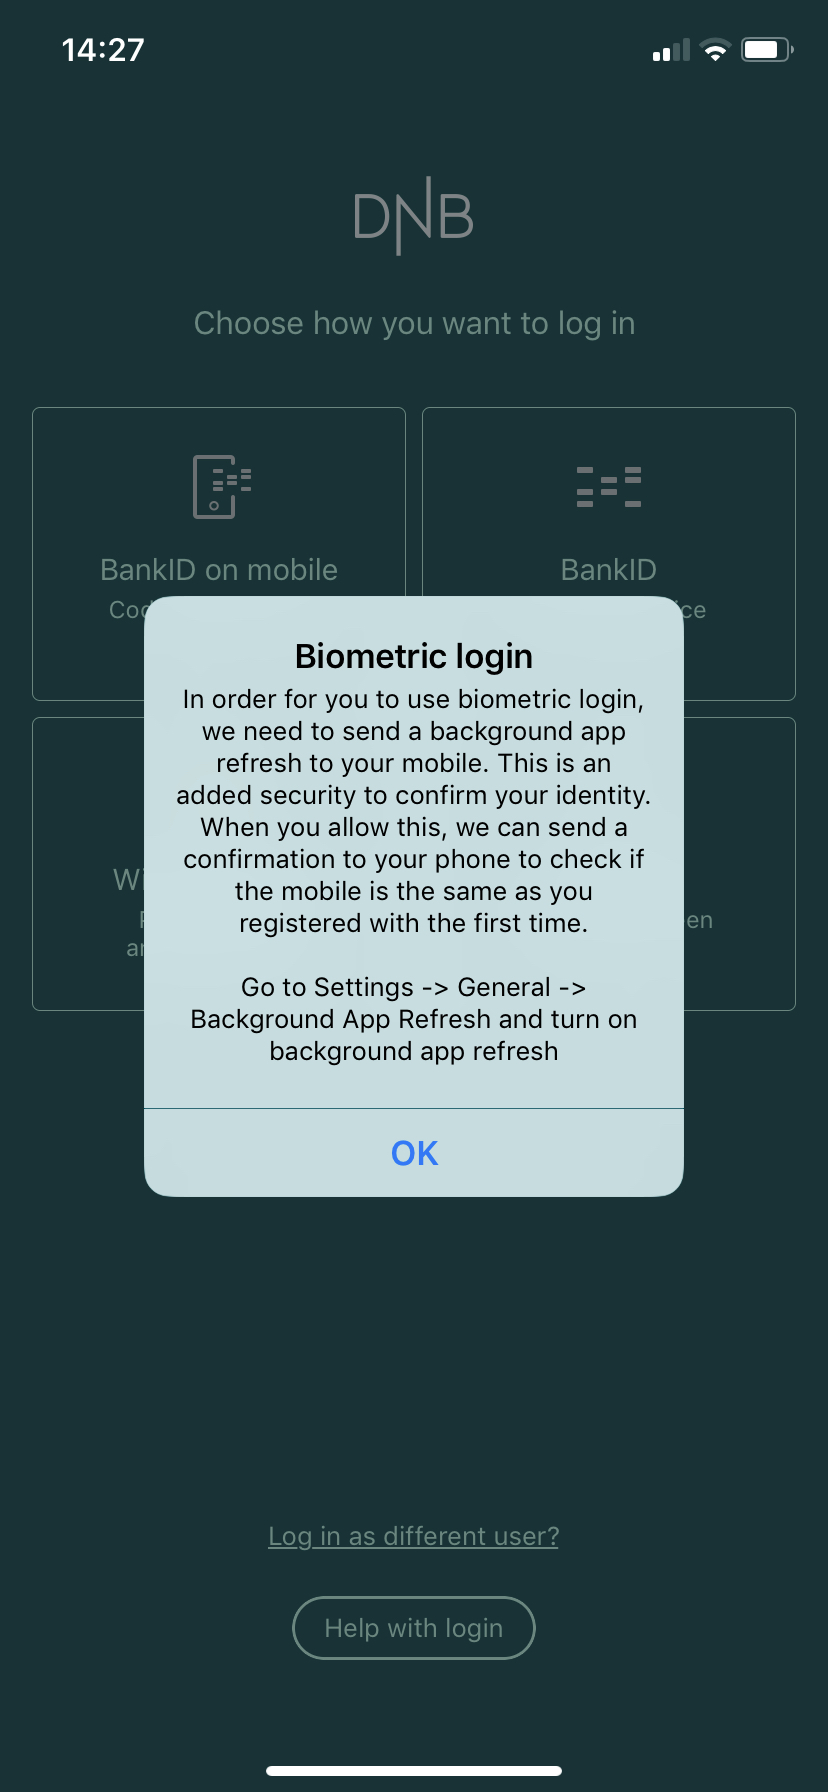 DNB, Face ID requires Background App Refresh